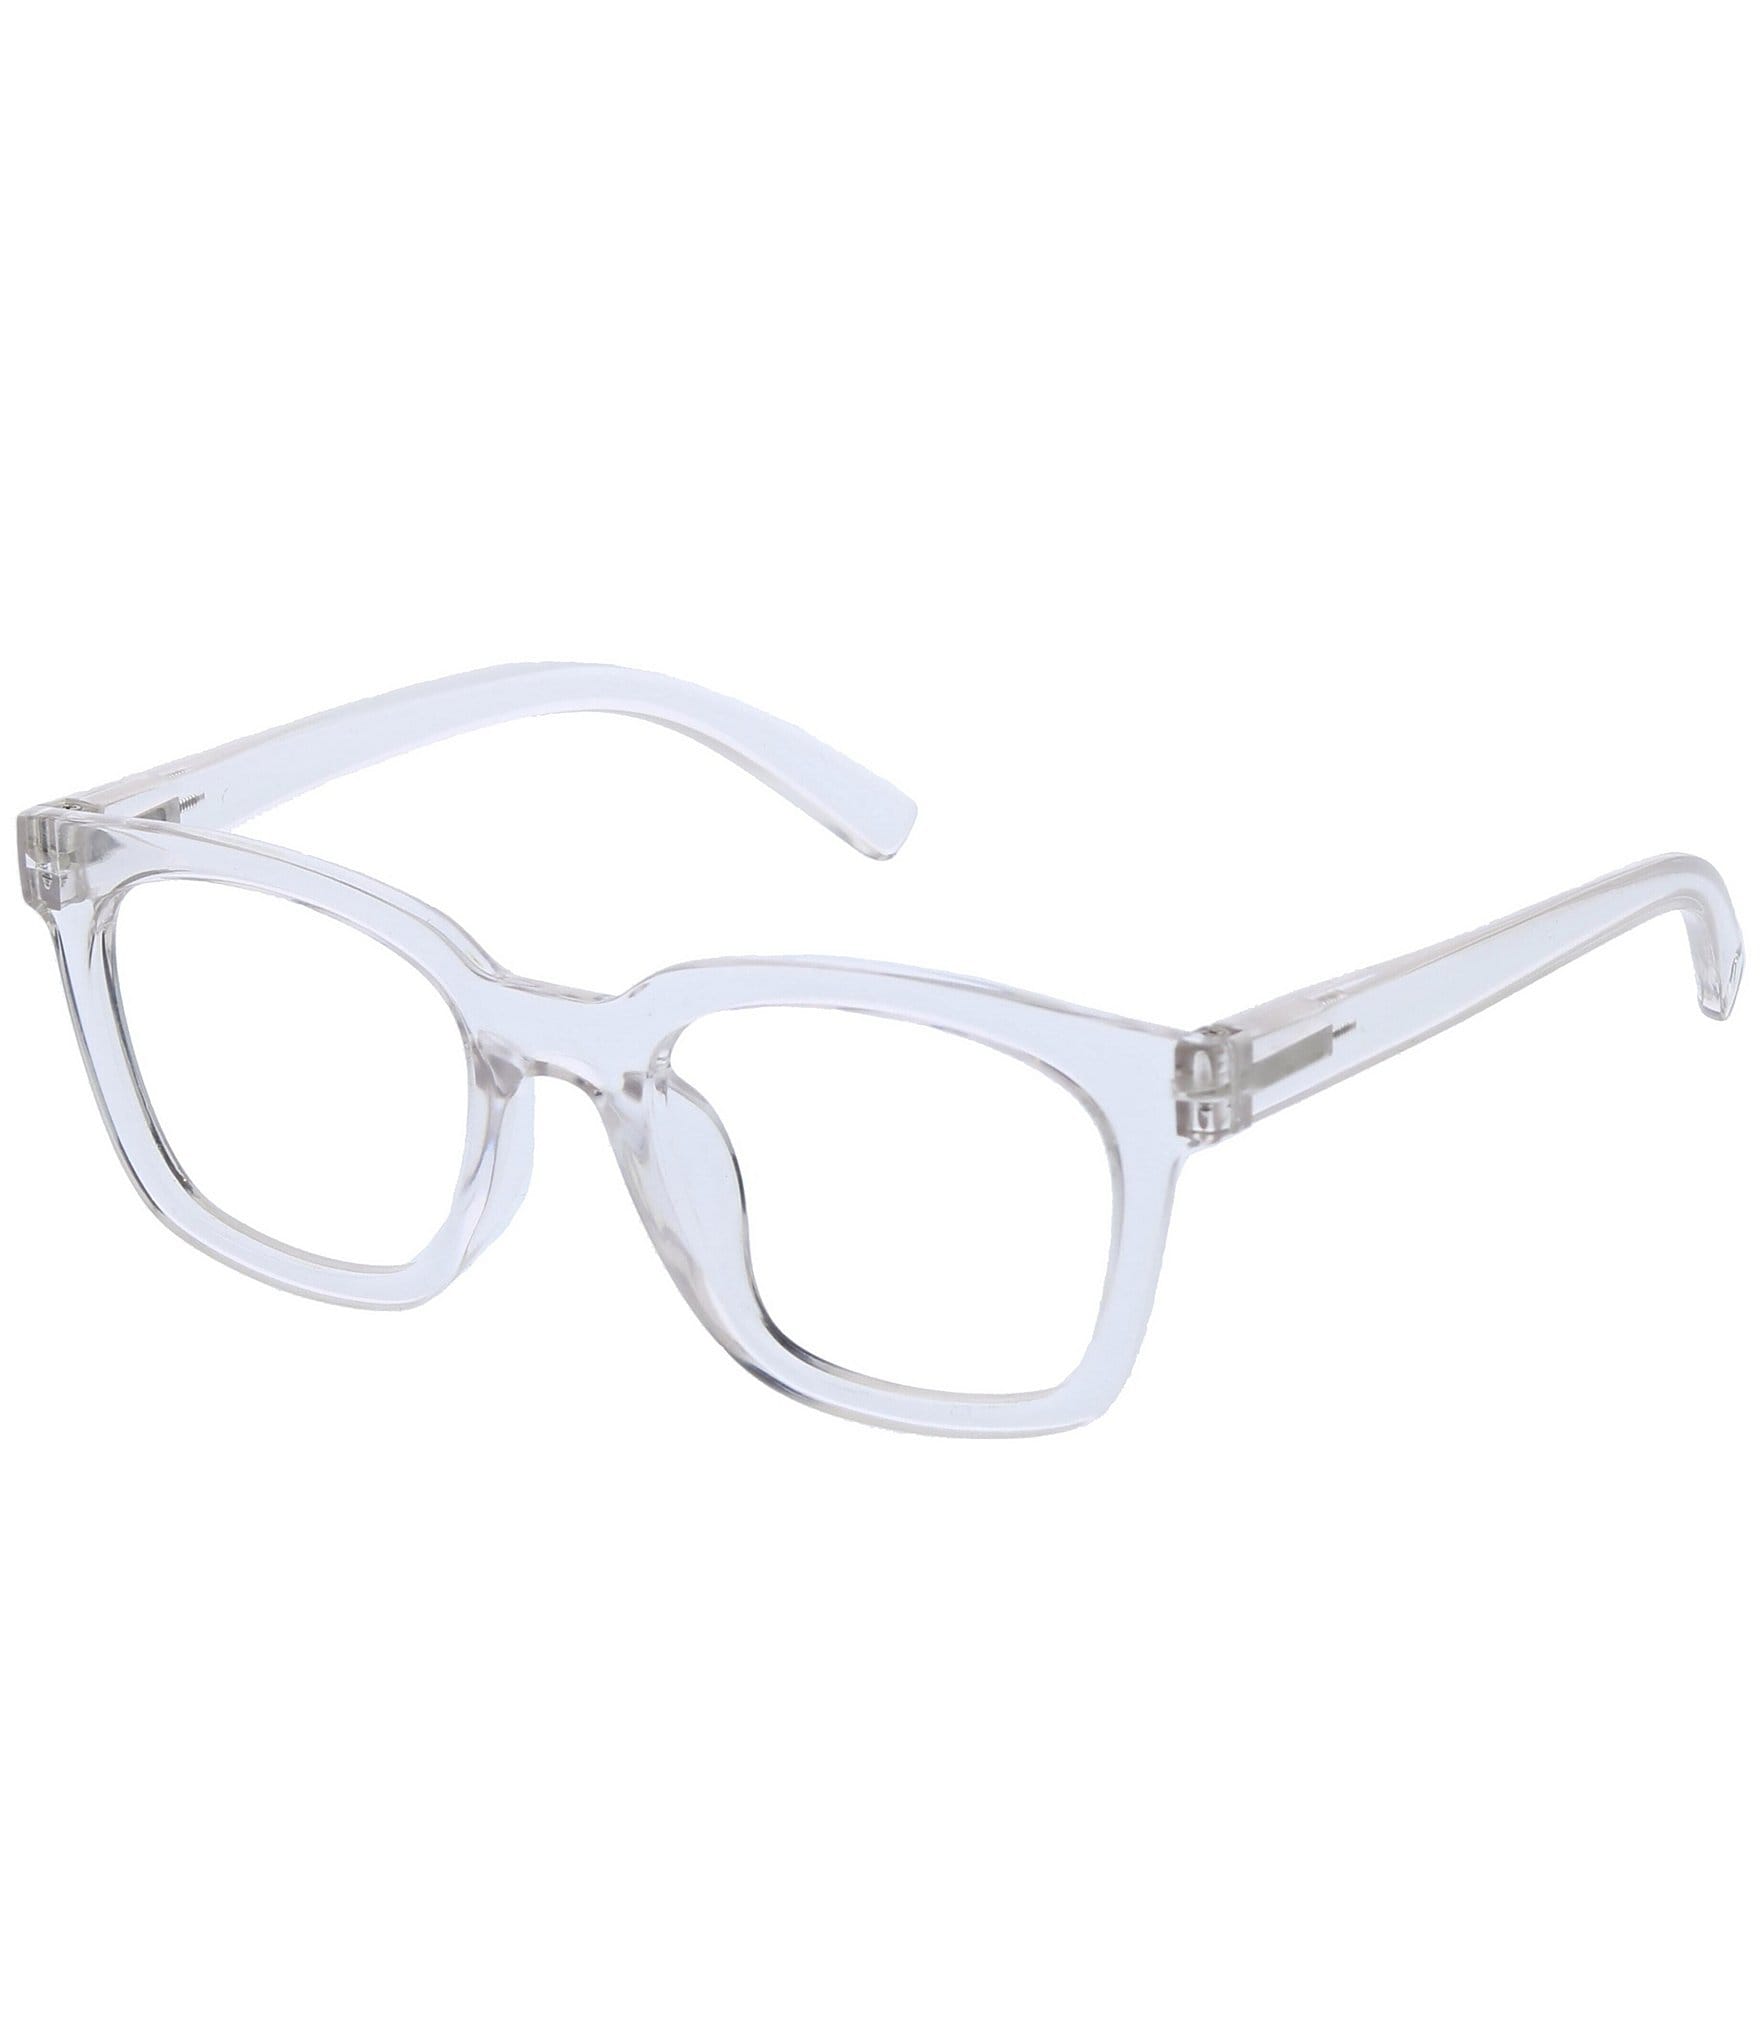 Peepers To The Max Blue Light Reader Glasses | Dillard's